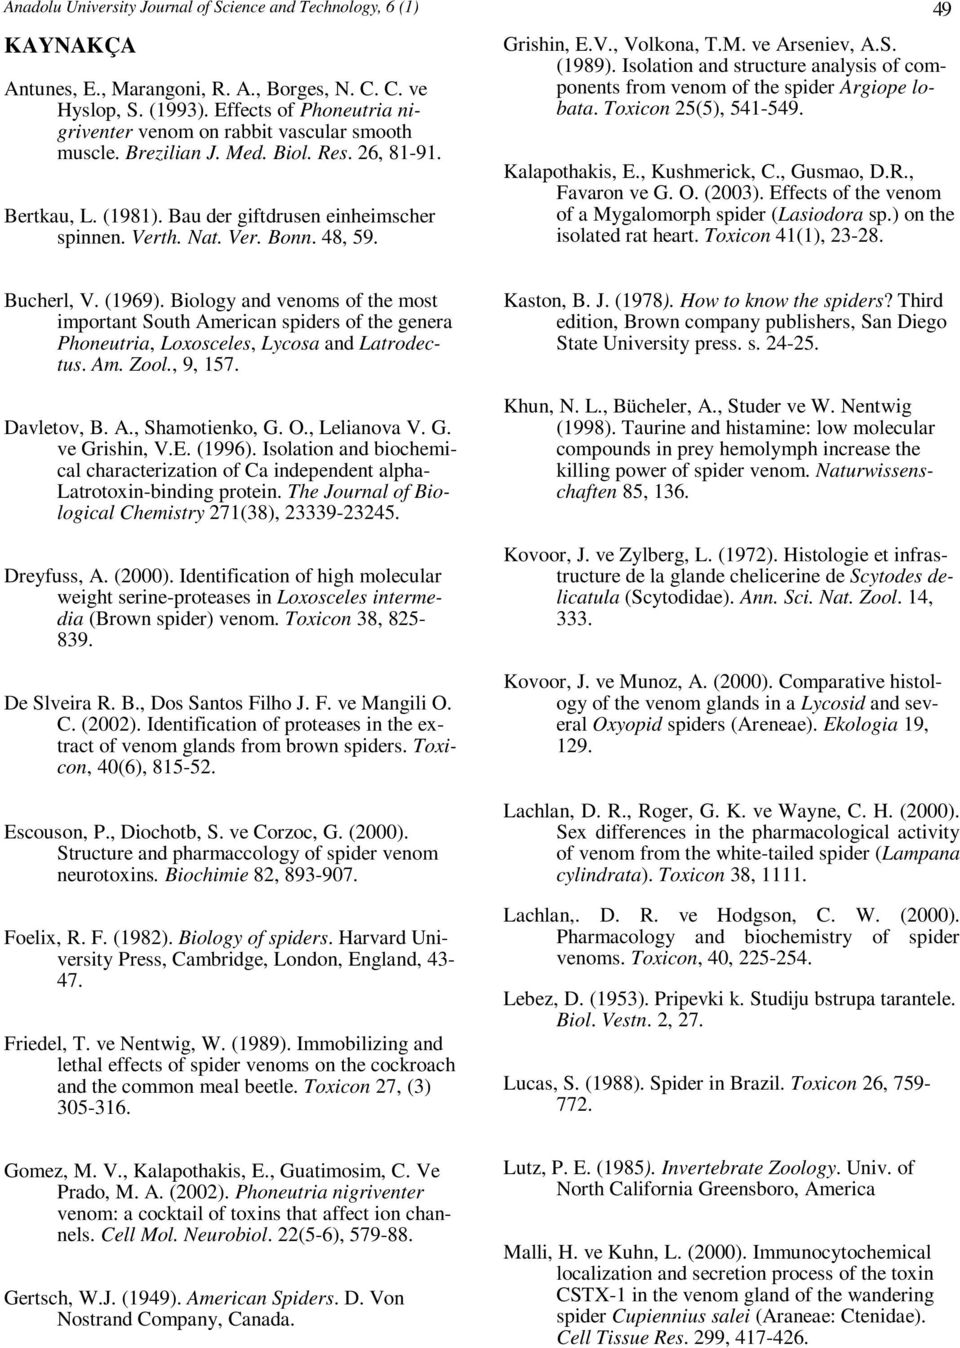 48, 59. Grishin, E.V., Volkona, T.M. ve Arseniev, A.S. (1989). Isolation and structure analysis of components from venom of the spider Argiope lobata. Toxicon 25(5), 541-549. Kalapothakis, E.